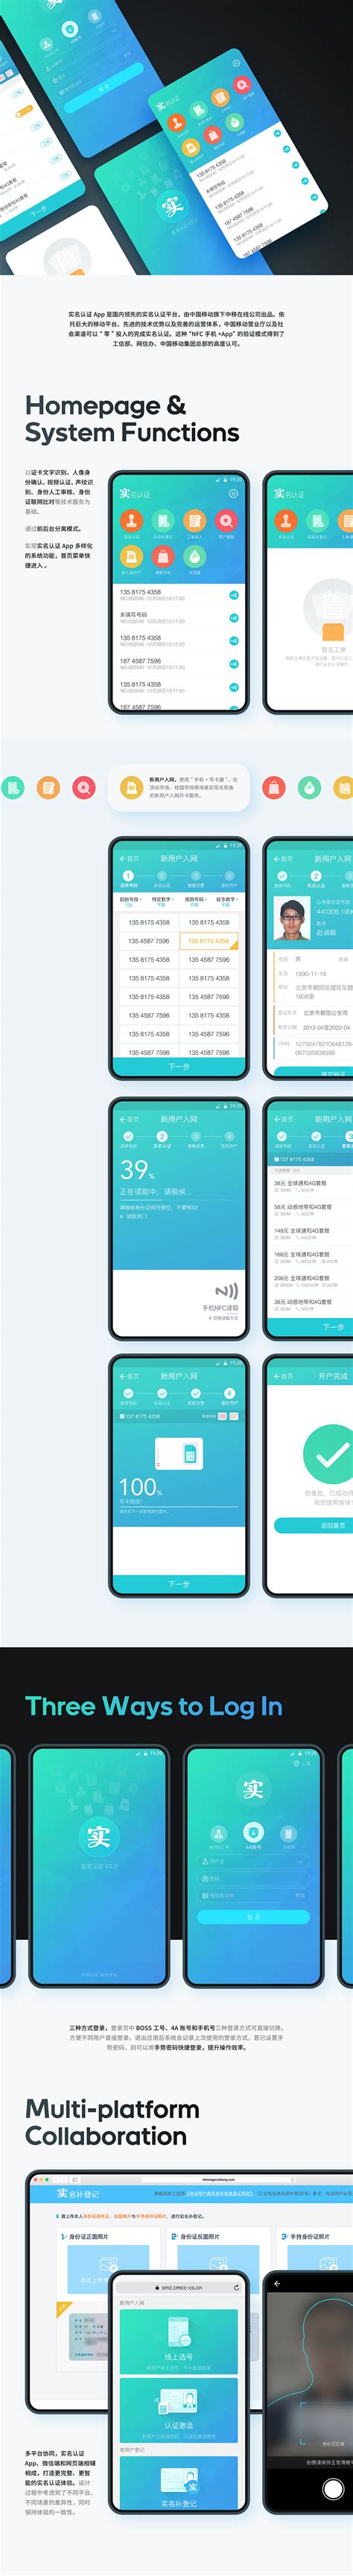 China Mobile Real-name Authentication 中国移动实名认证 V3.0 on Behance